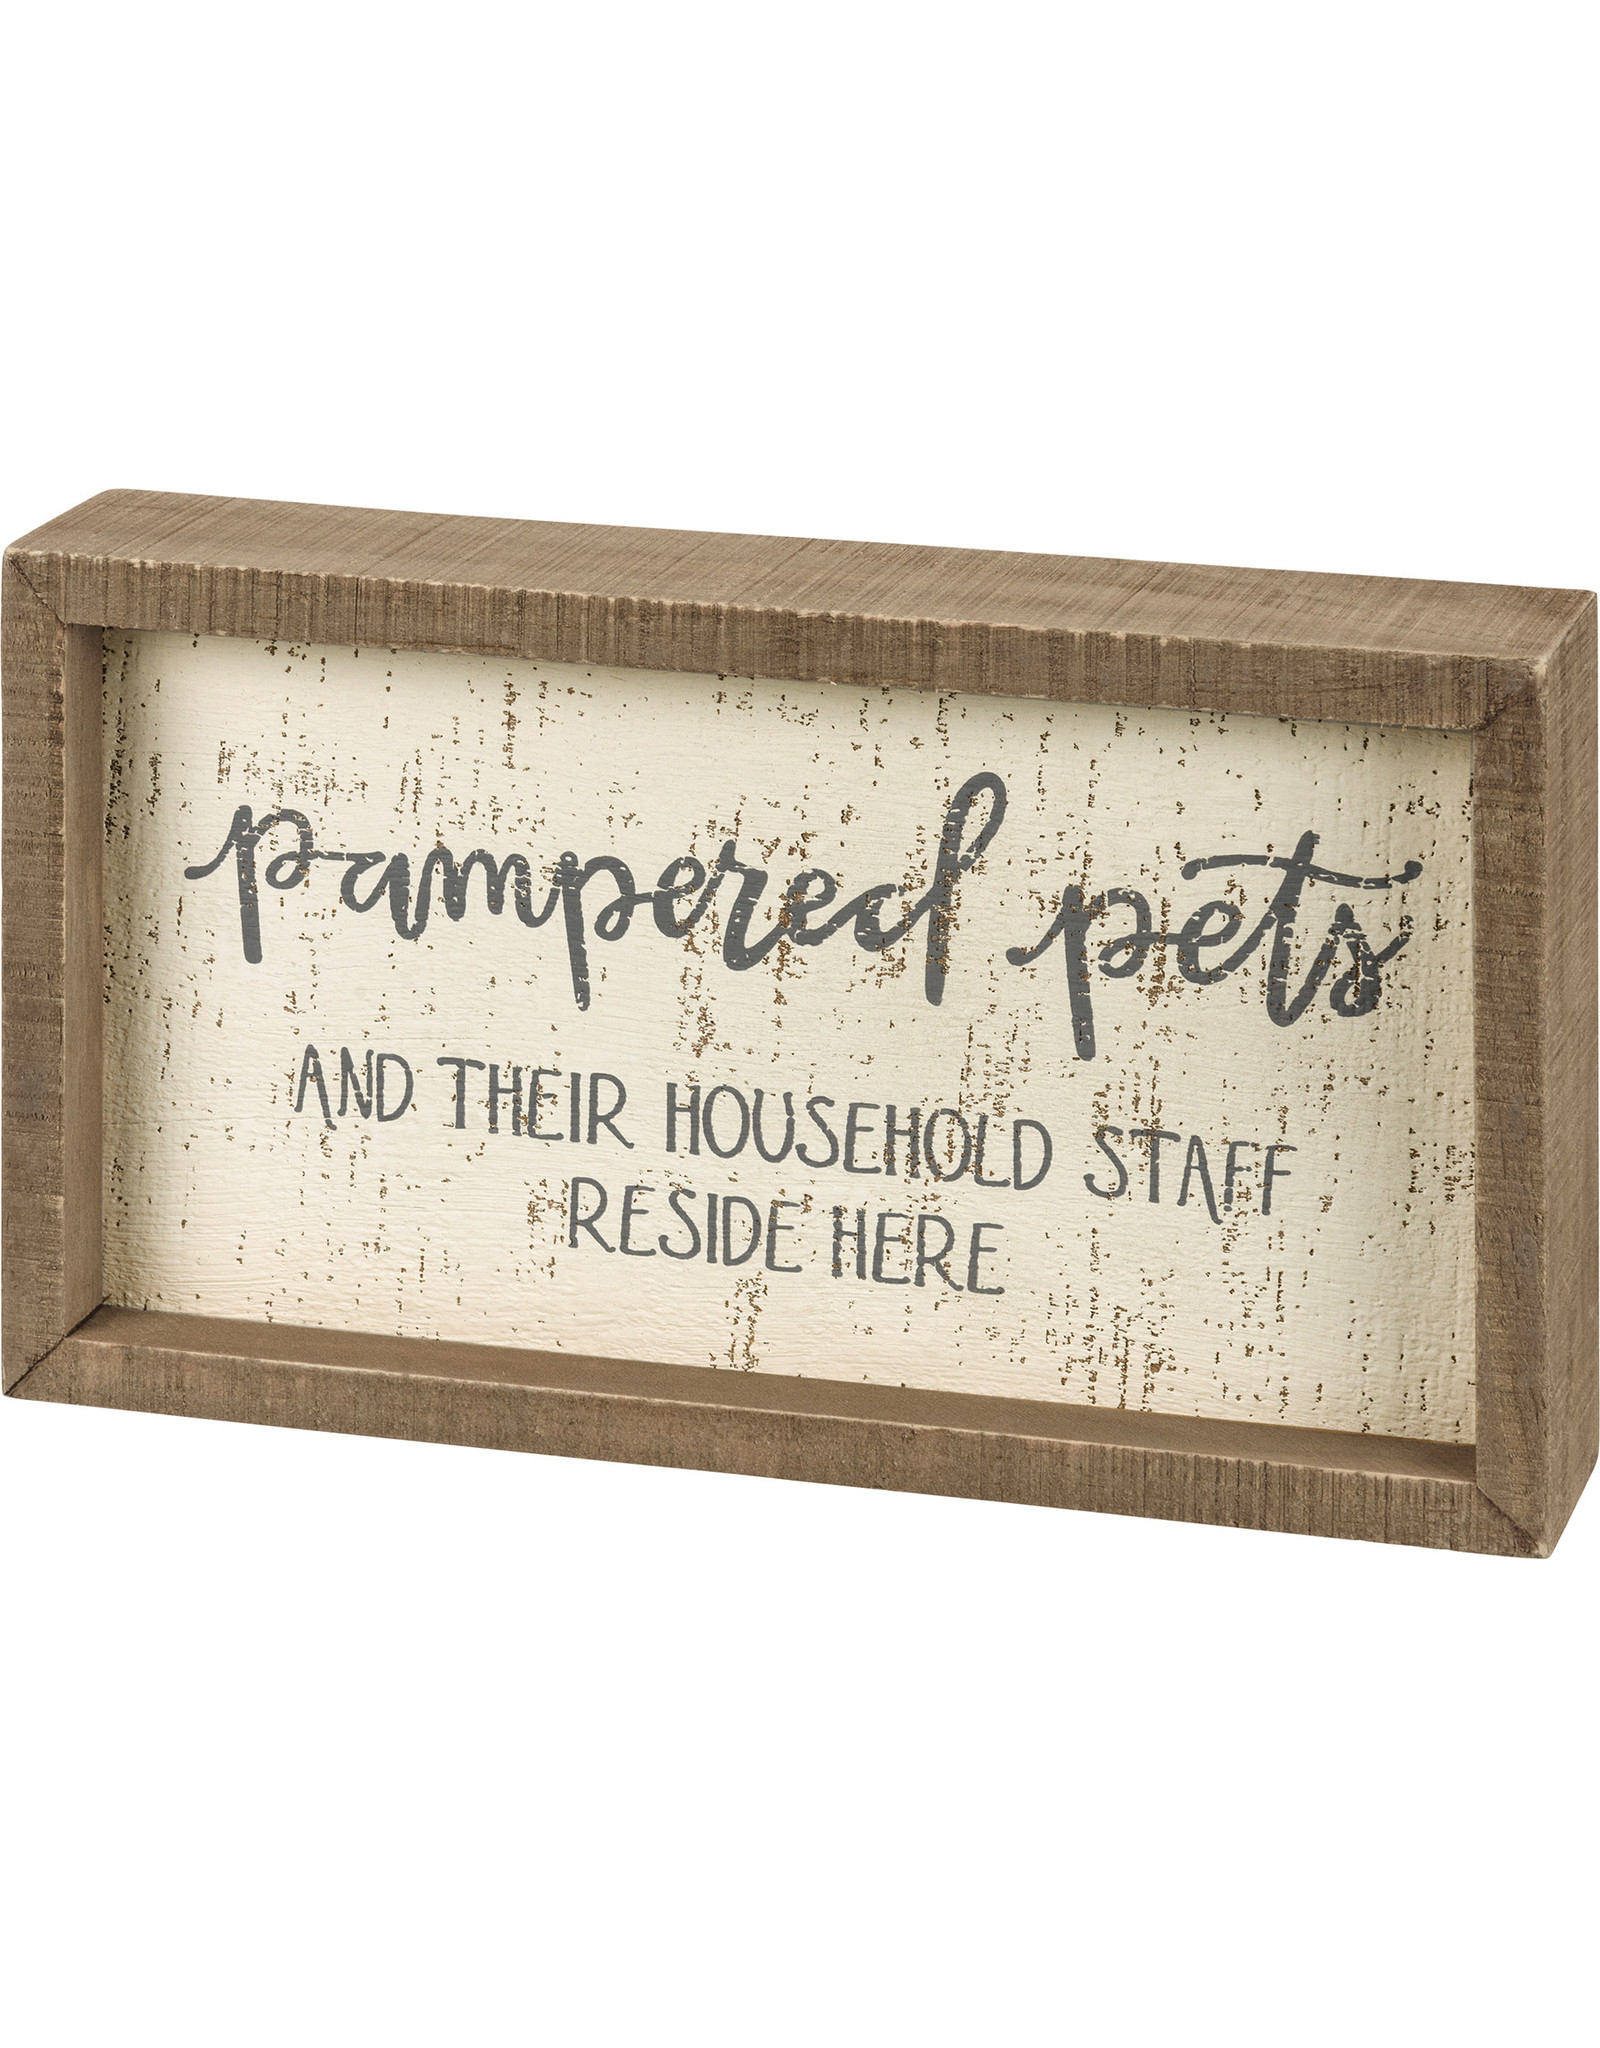 PRIMITIVES BY KATHY PET LOVER BLOCK SIGNS PAMPERED PETS